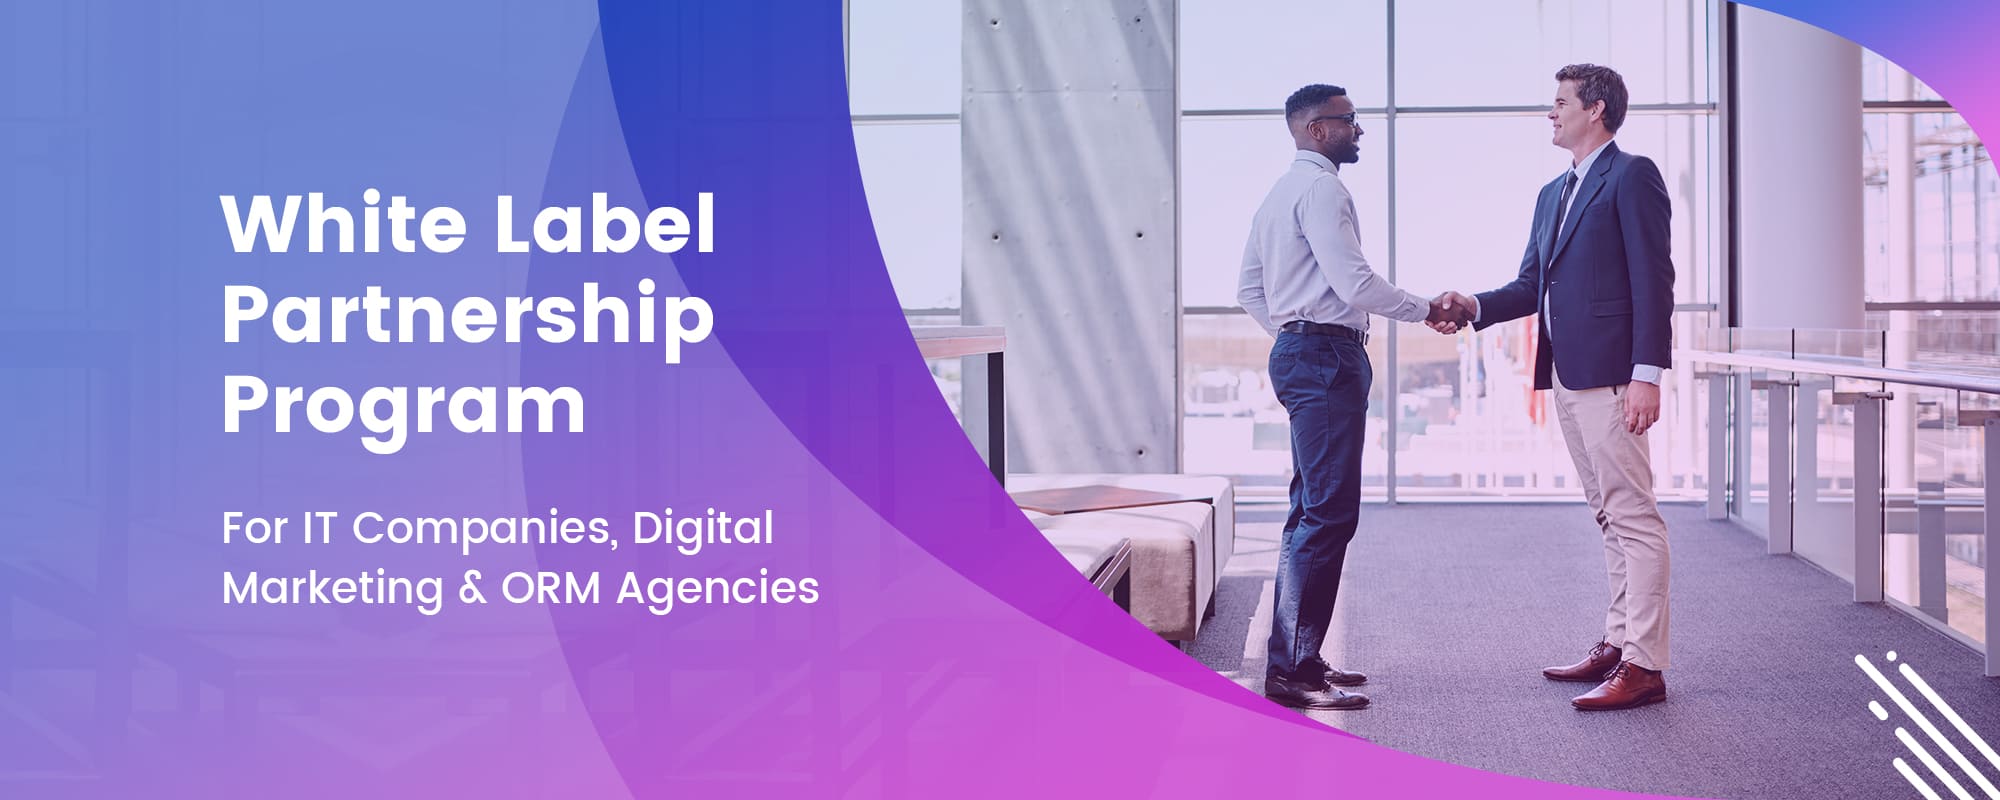 How To Grow Your Business With FATbit’s White Label Partnership Program?